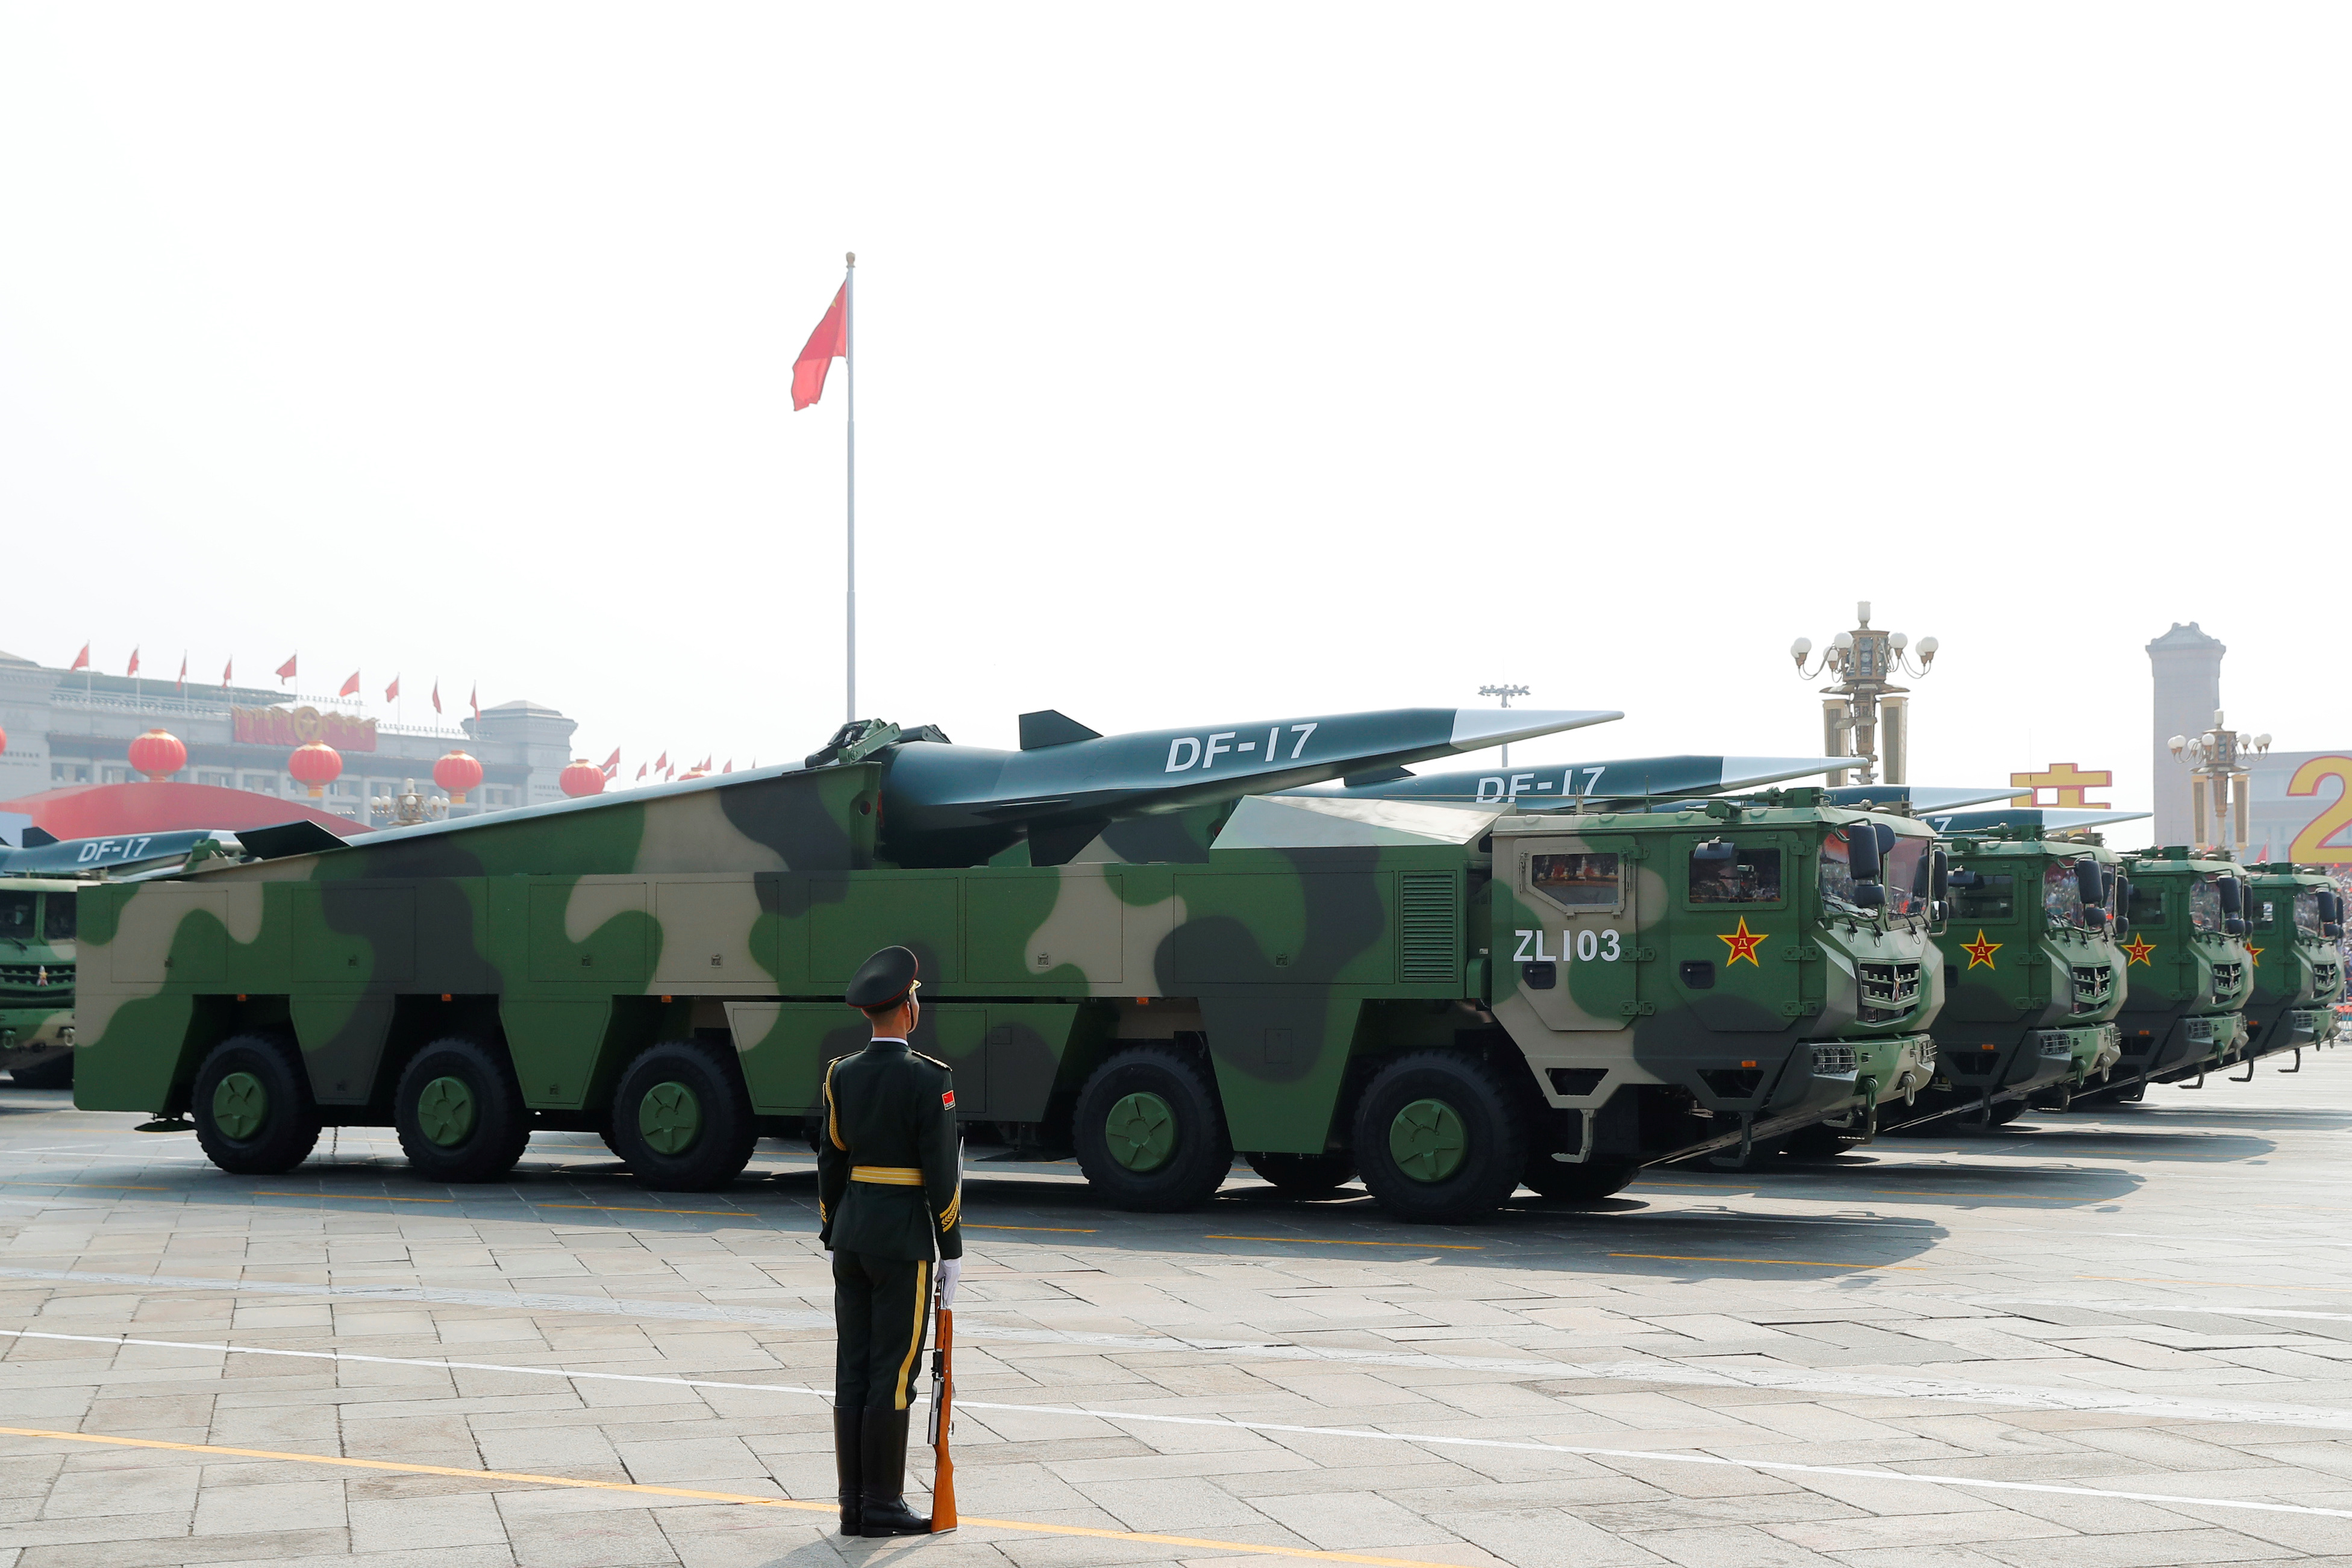 Military vehicles carrying hypersonic missiles DF-17 drive past Tiananmen Square during the military parade marking the 70th founding anniversary of People's Republic of China, on its National Day in Beijing, China October 1, 2019.  REUTERS/Thomas Peter